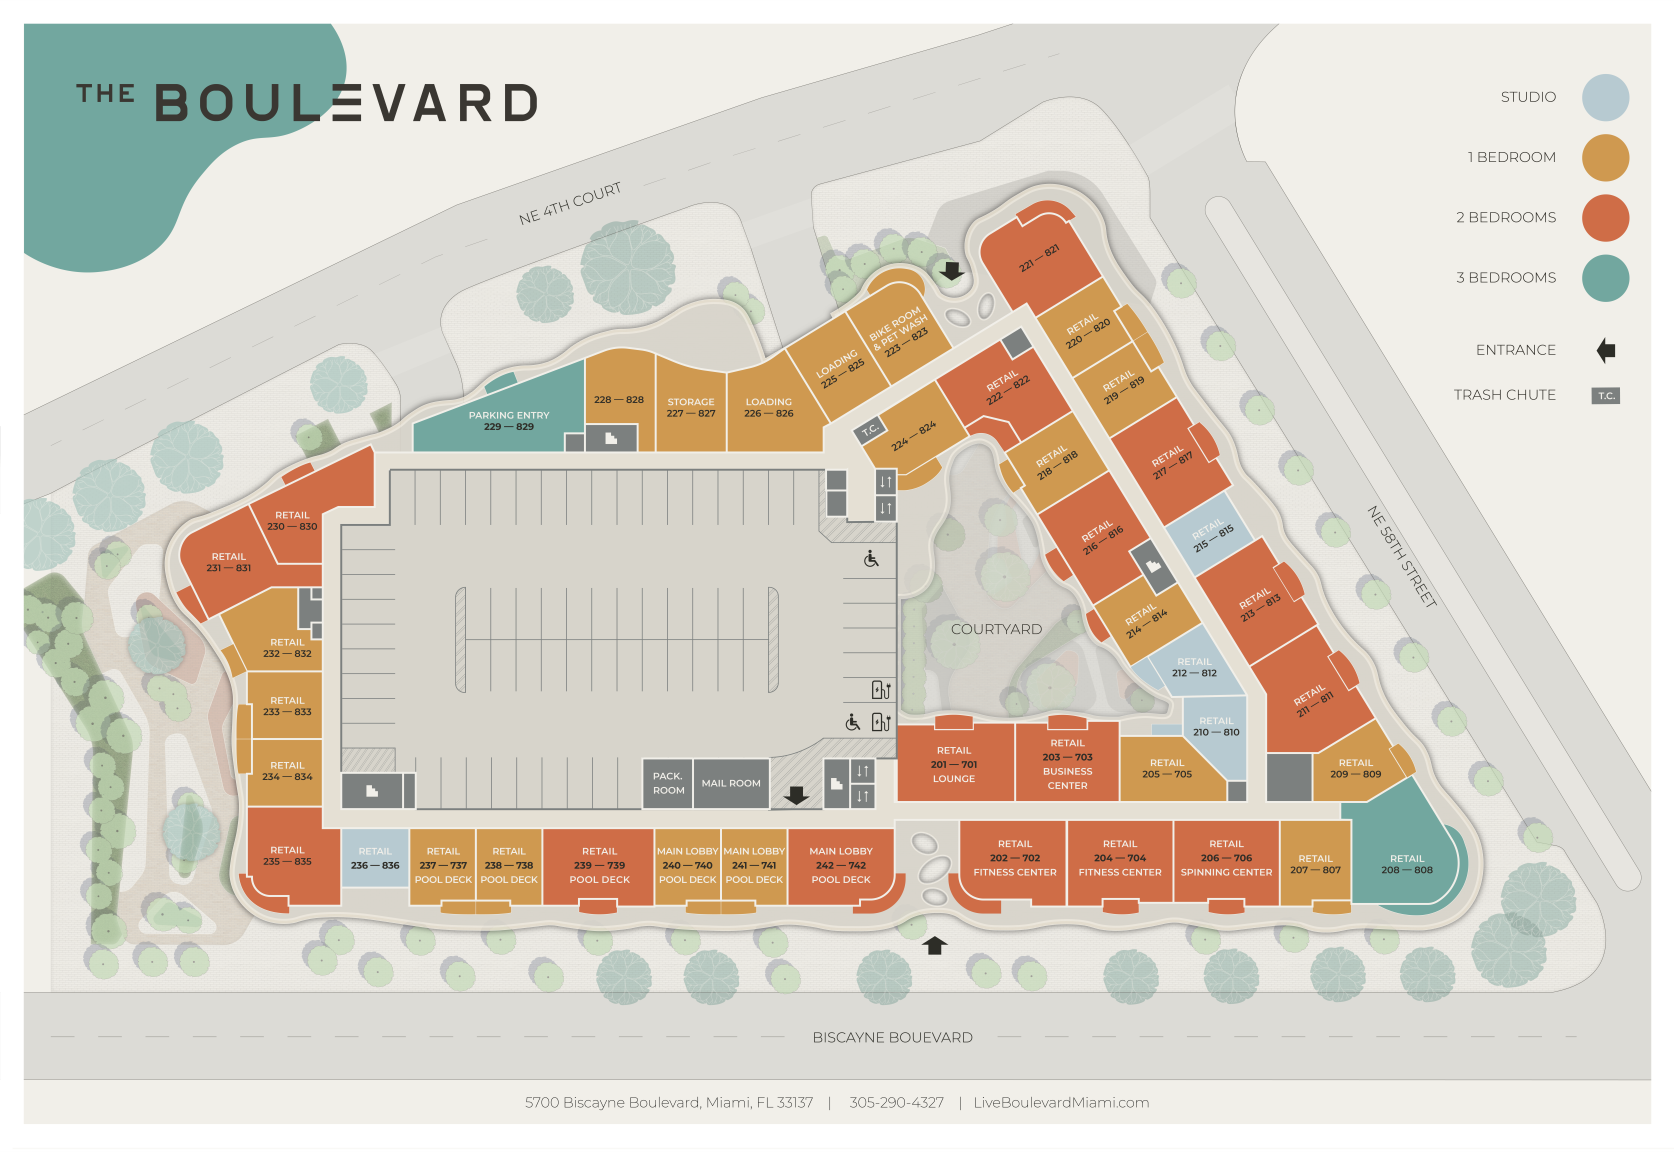 Site plan of an apartment community - The Boulevard